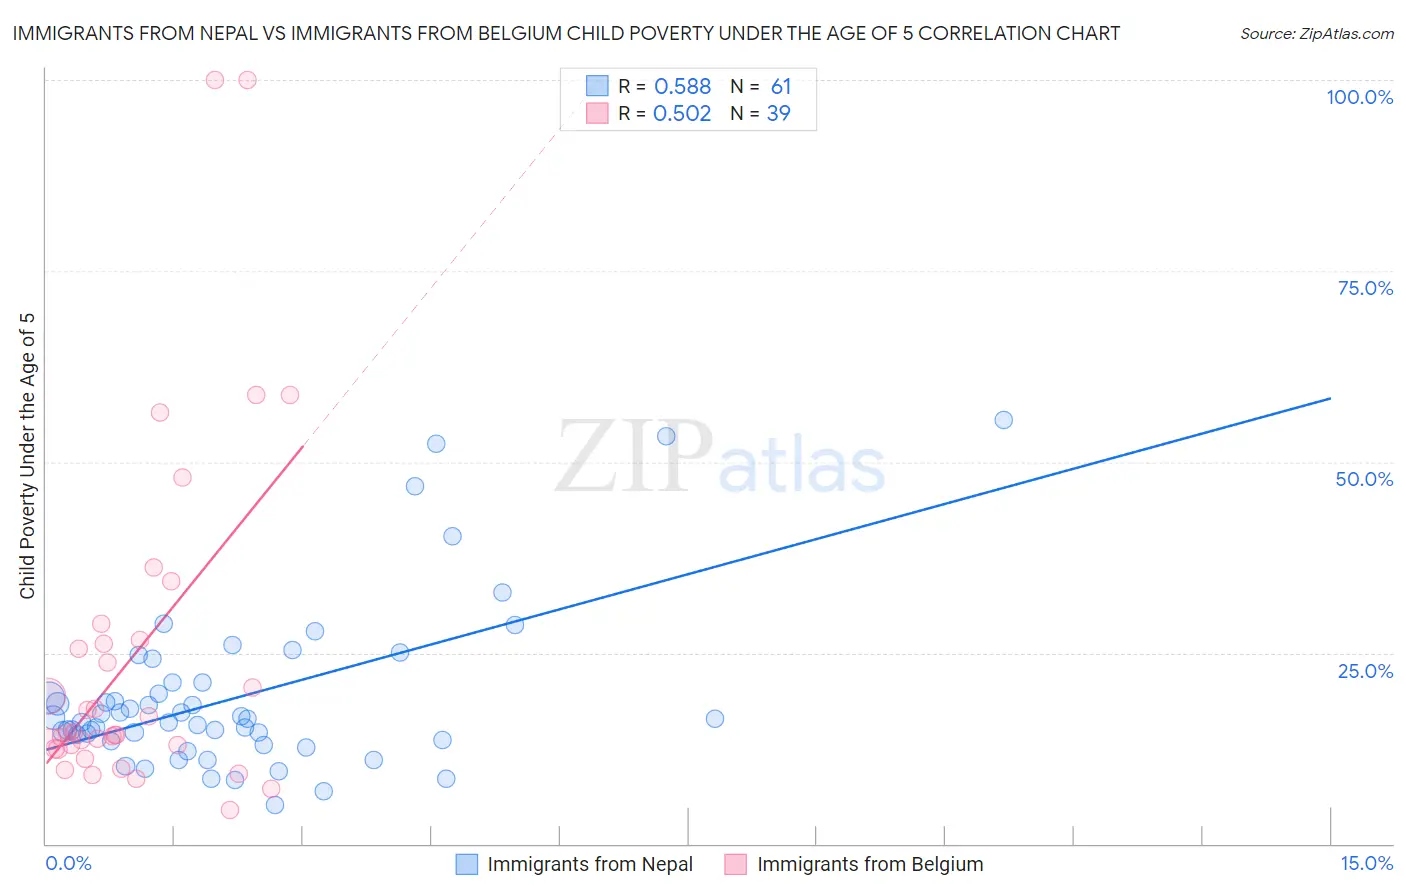 Immigrants from Nepal vs Immigrants from Belgium Child Poverty Under the Age of 5